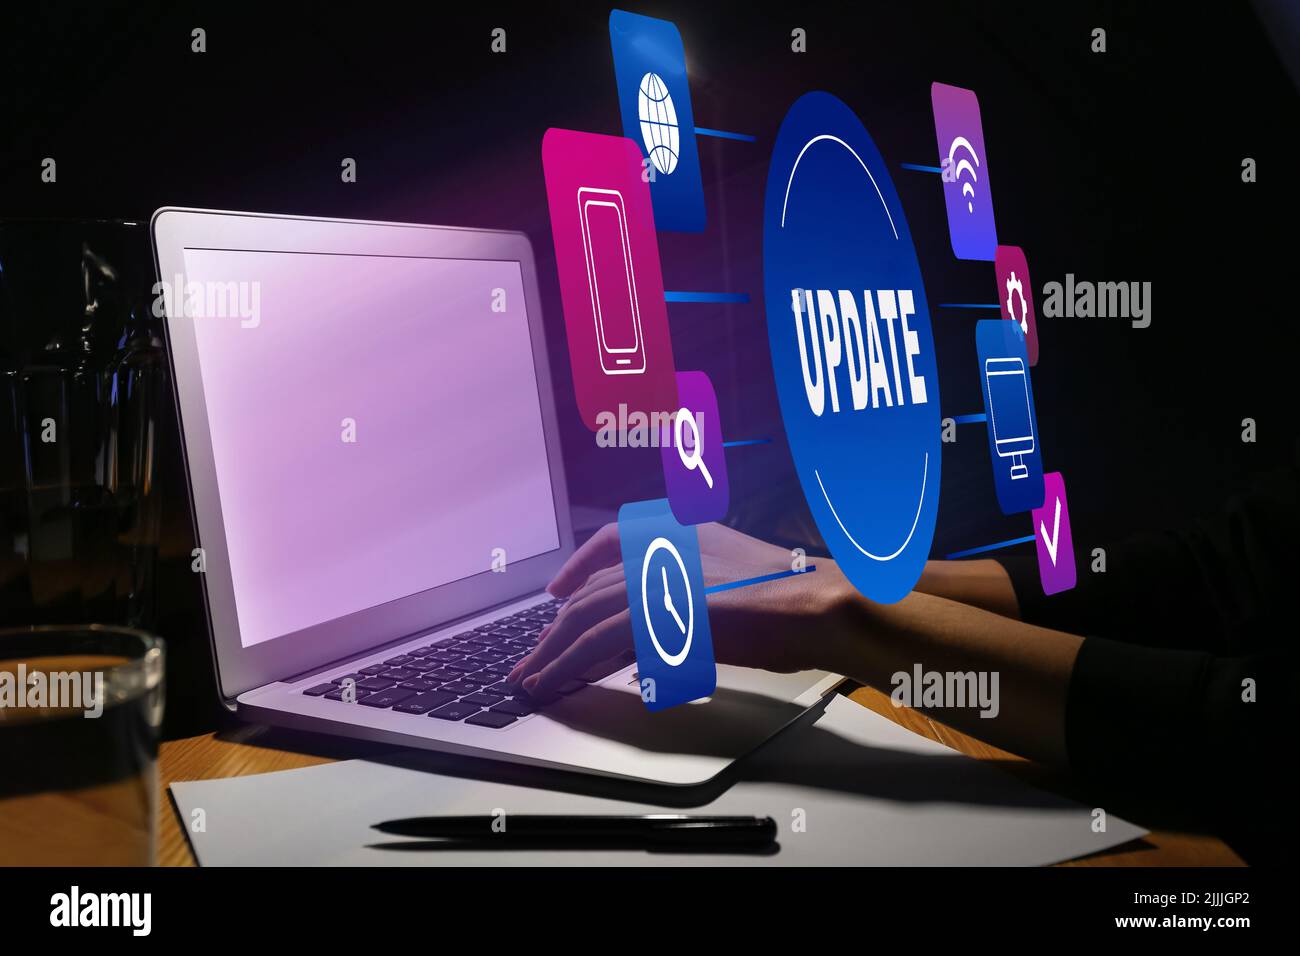 Woman working on laptop at table in evening. Concept of update Stock Photo